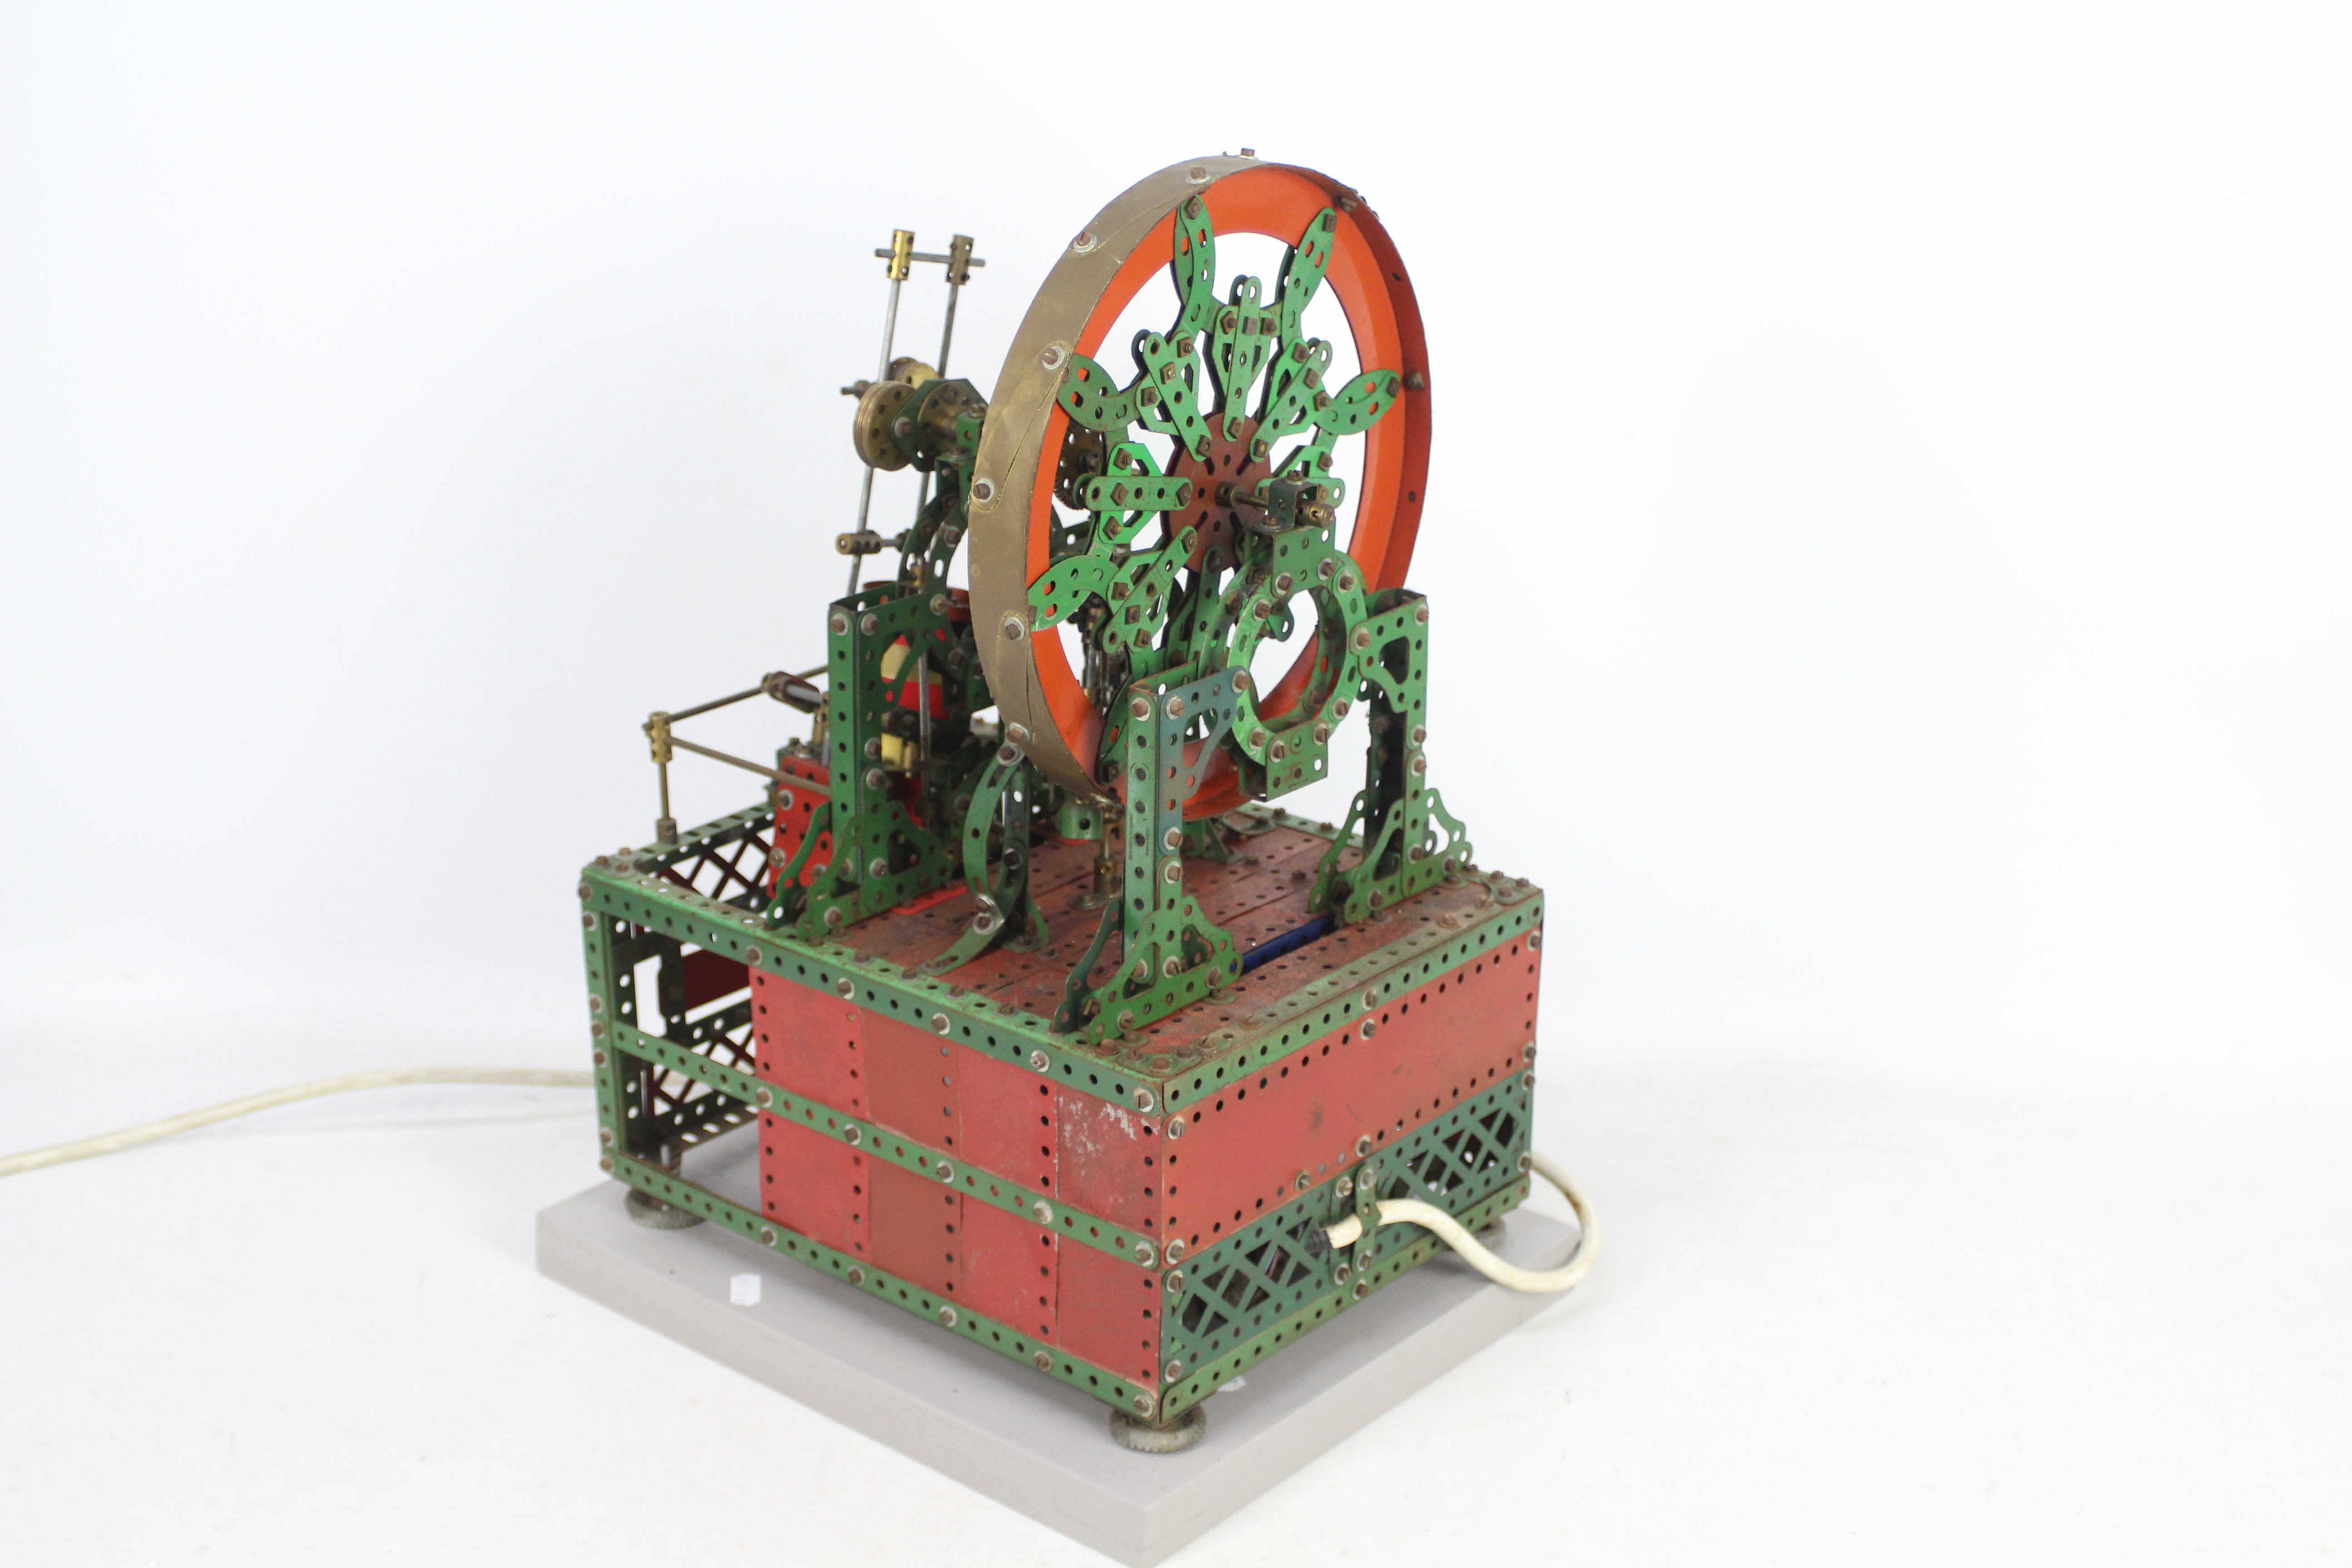 Meccano - A vintage red and green Meccano shop display model of a Decorative Wheel. - Image 6 of 8